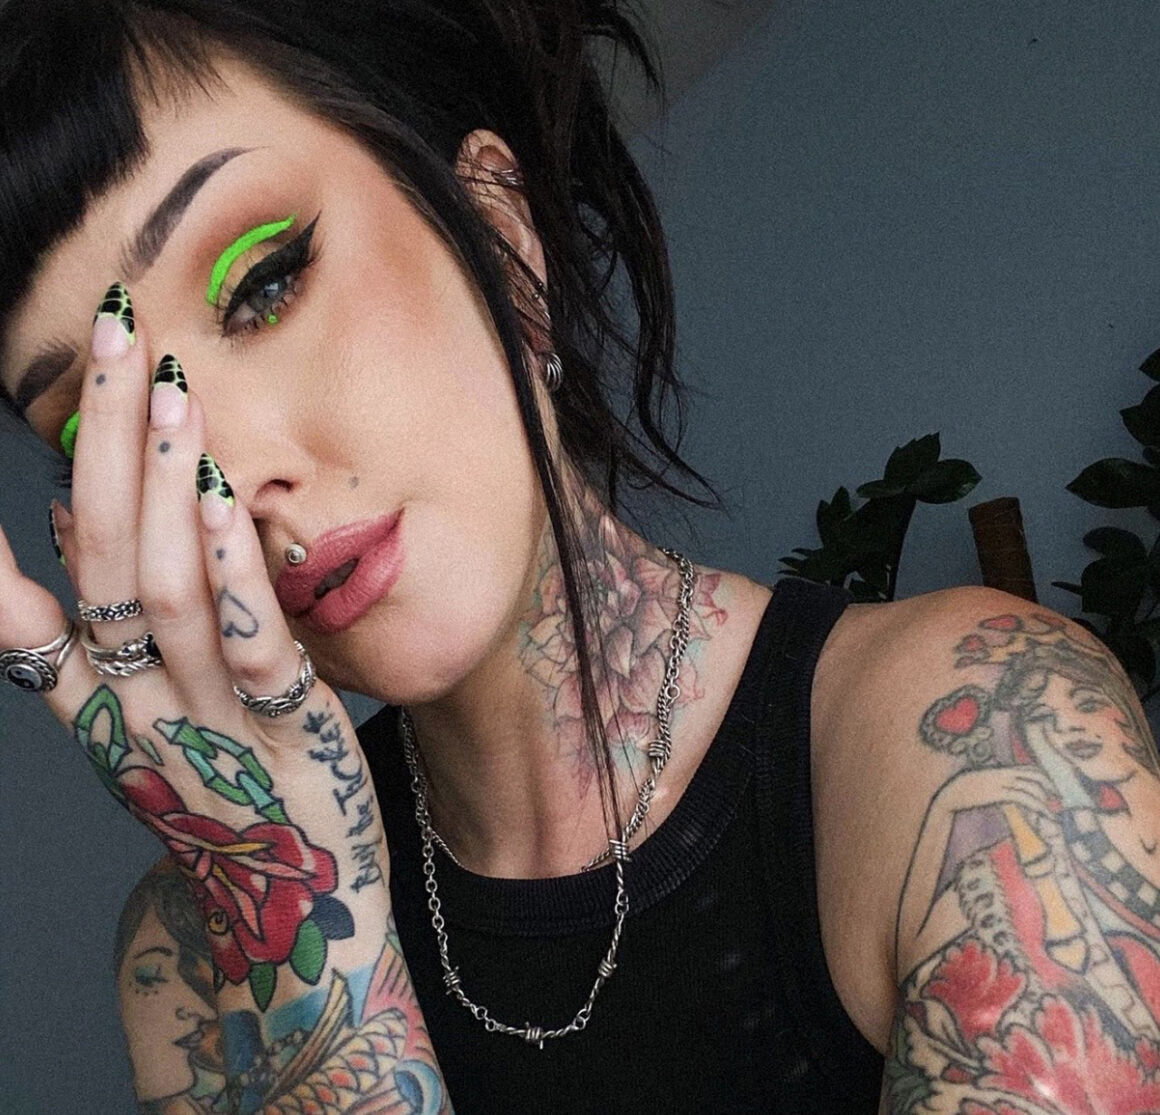 Meghan Ceallaigh, a tattooed girl colourful and bright - Tattoo Life